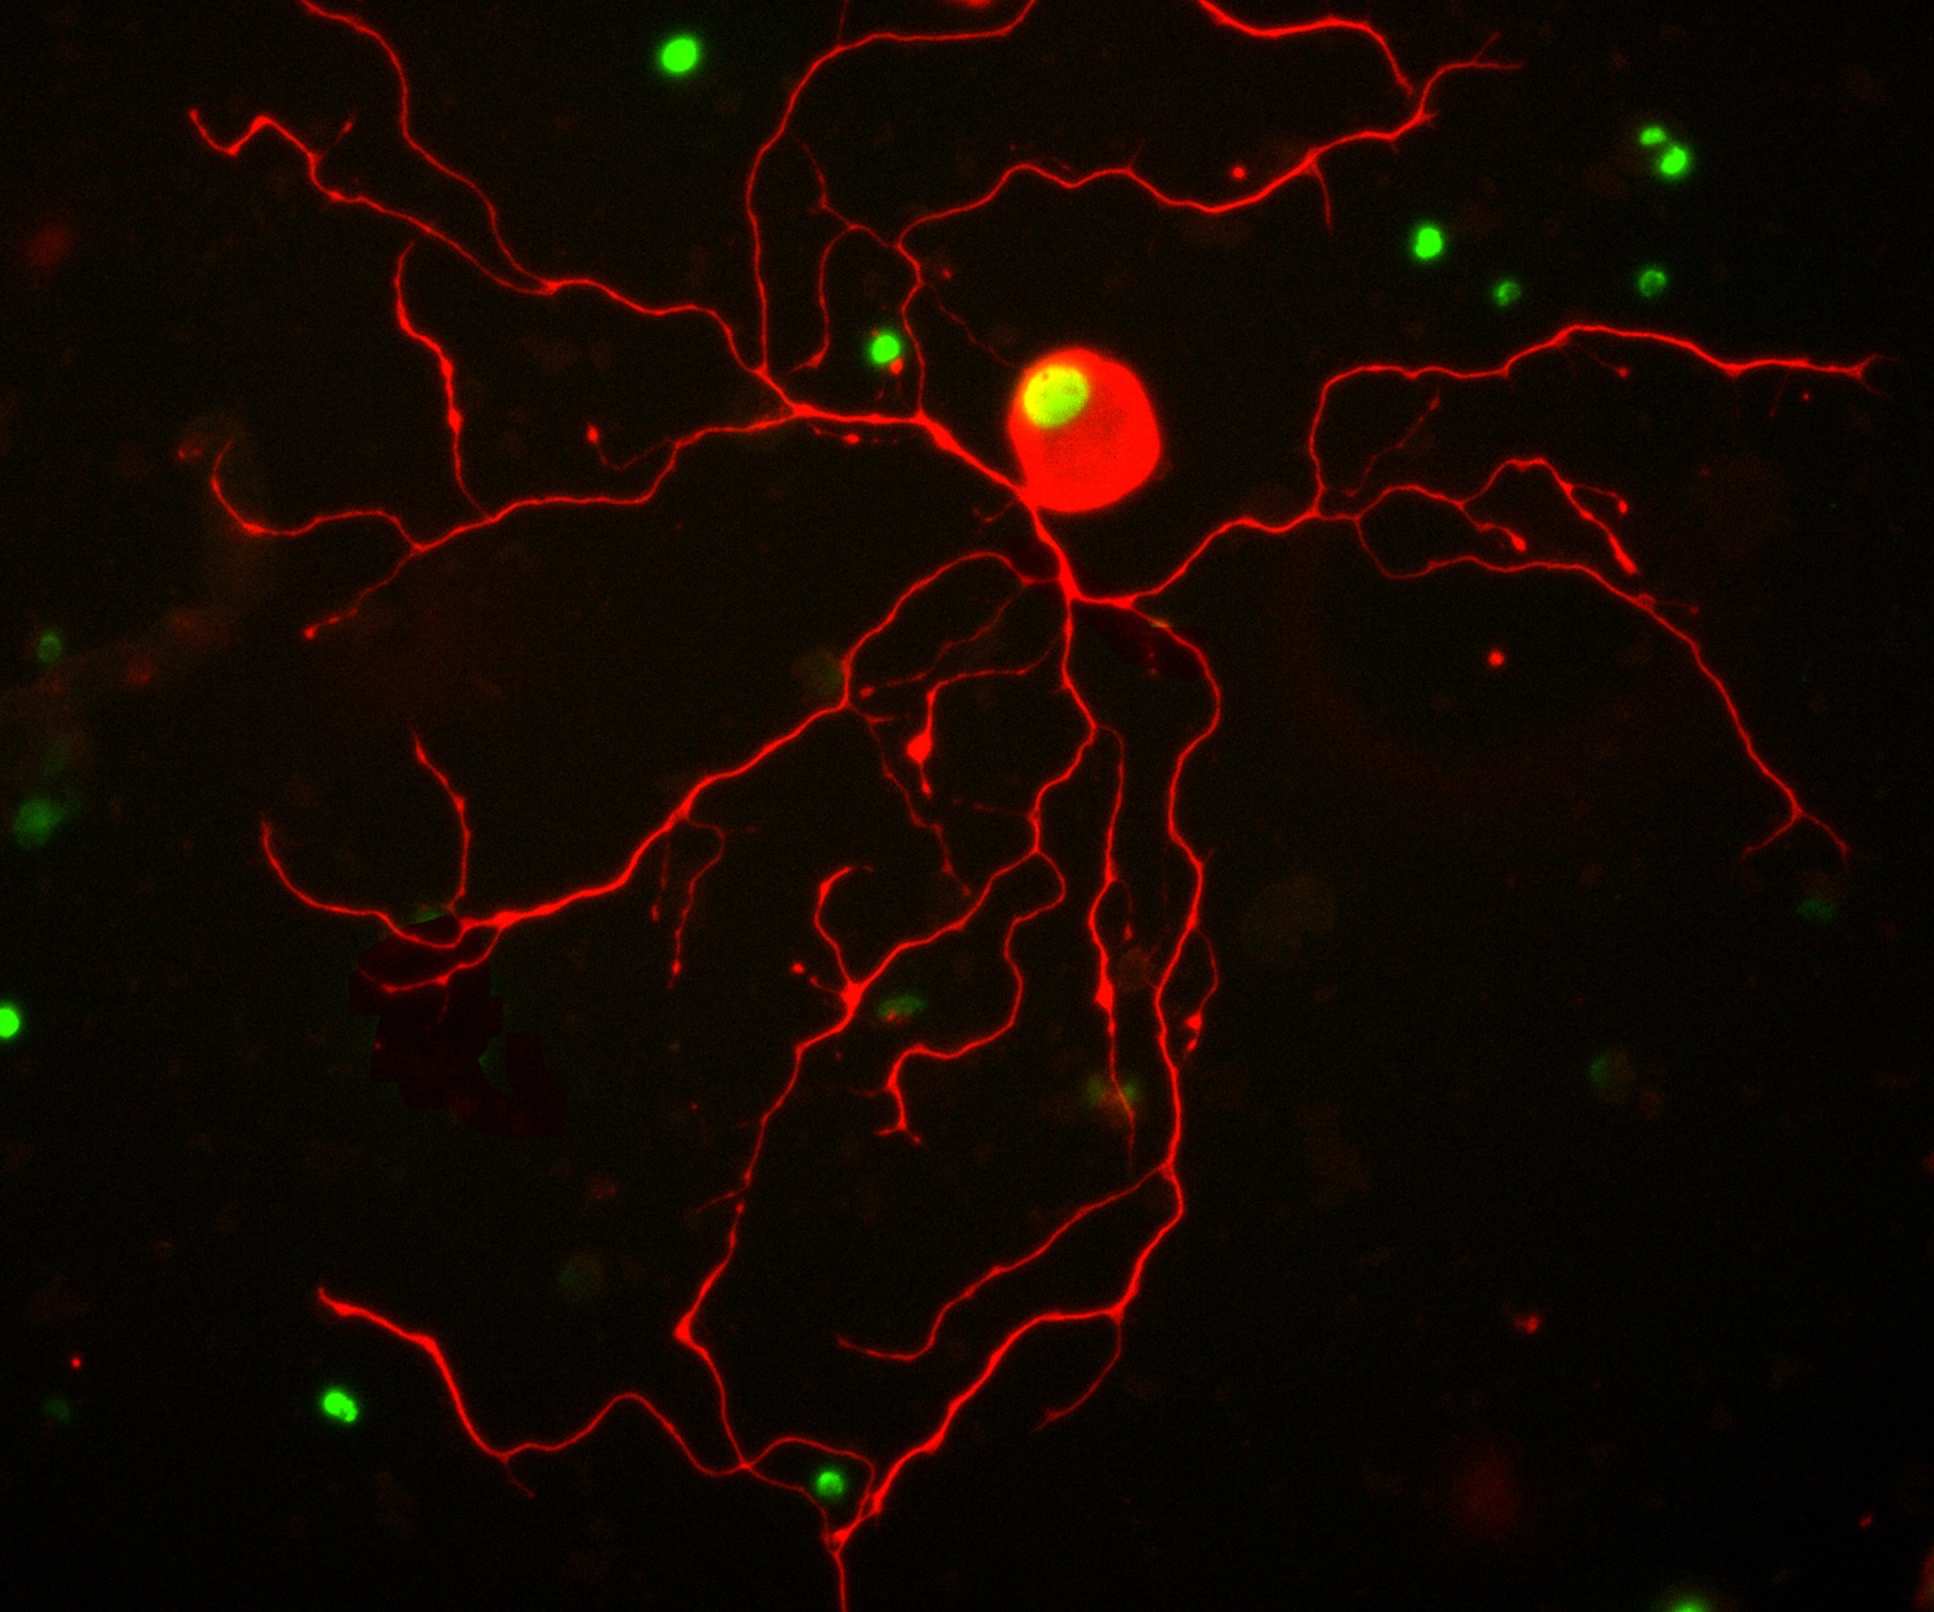 Image of a nerve cell branching out, stained with fluorescent markers